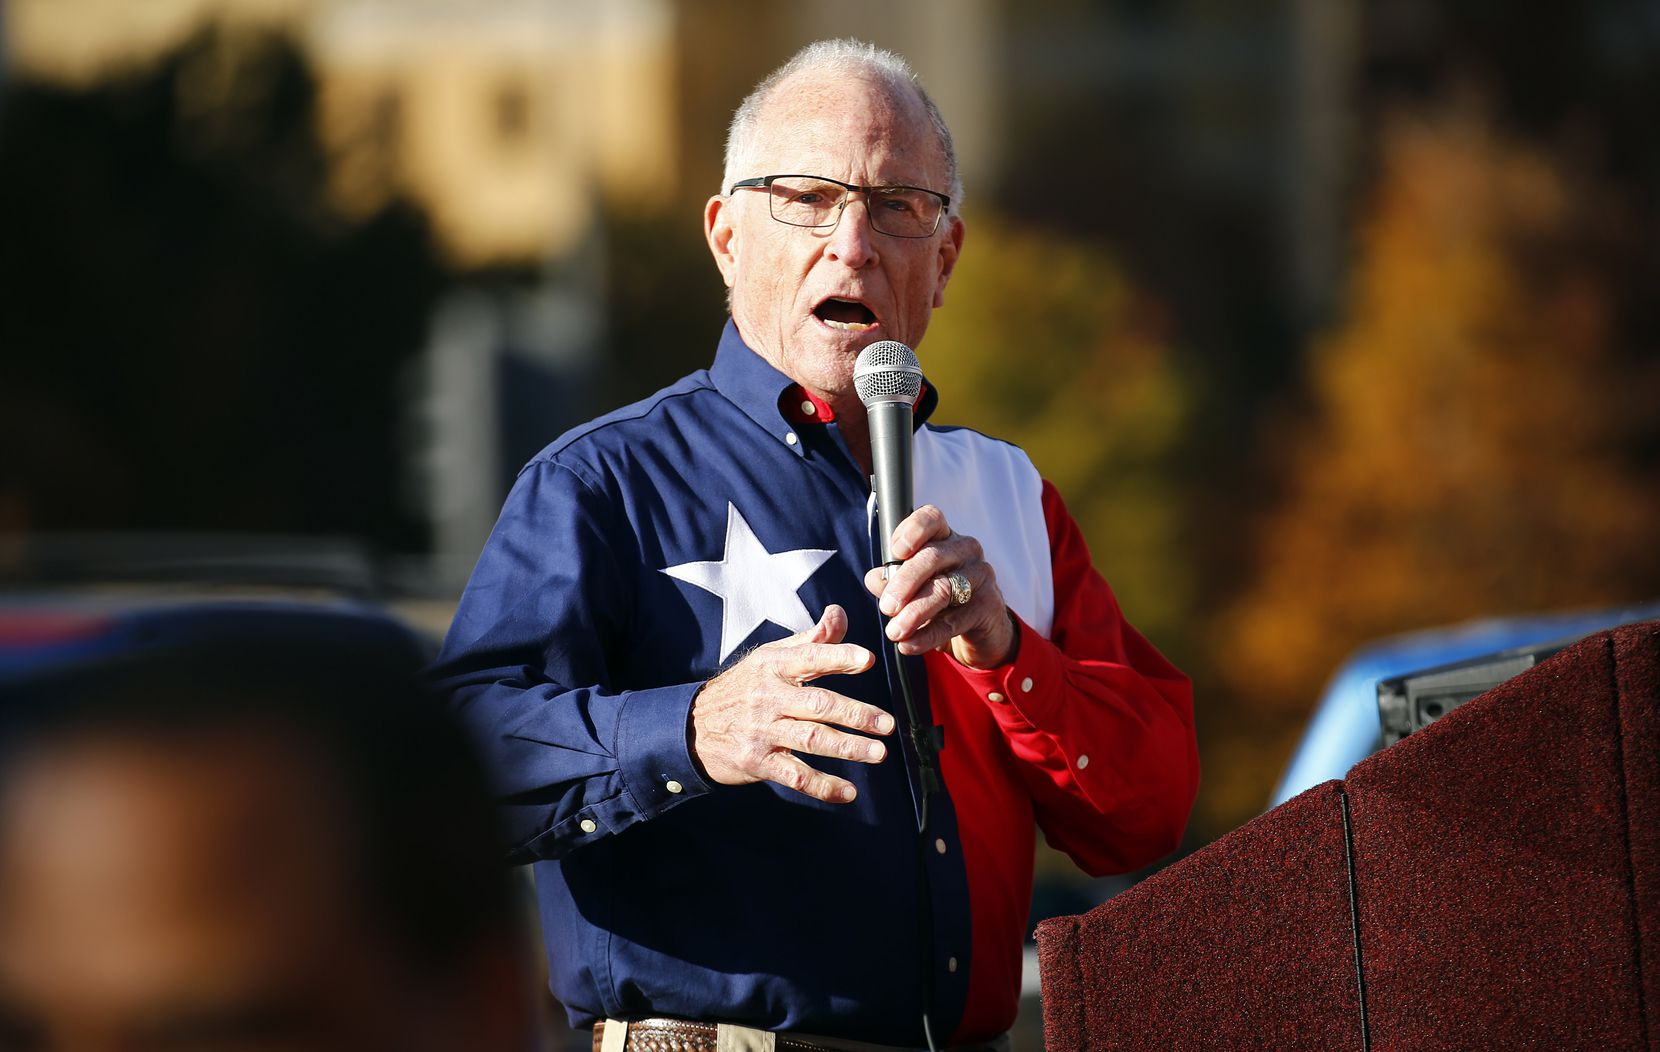 Texas state Sen. Bob Hall of Rockwall was among speakers at the rally.